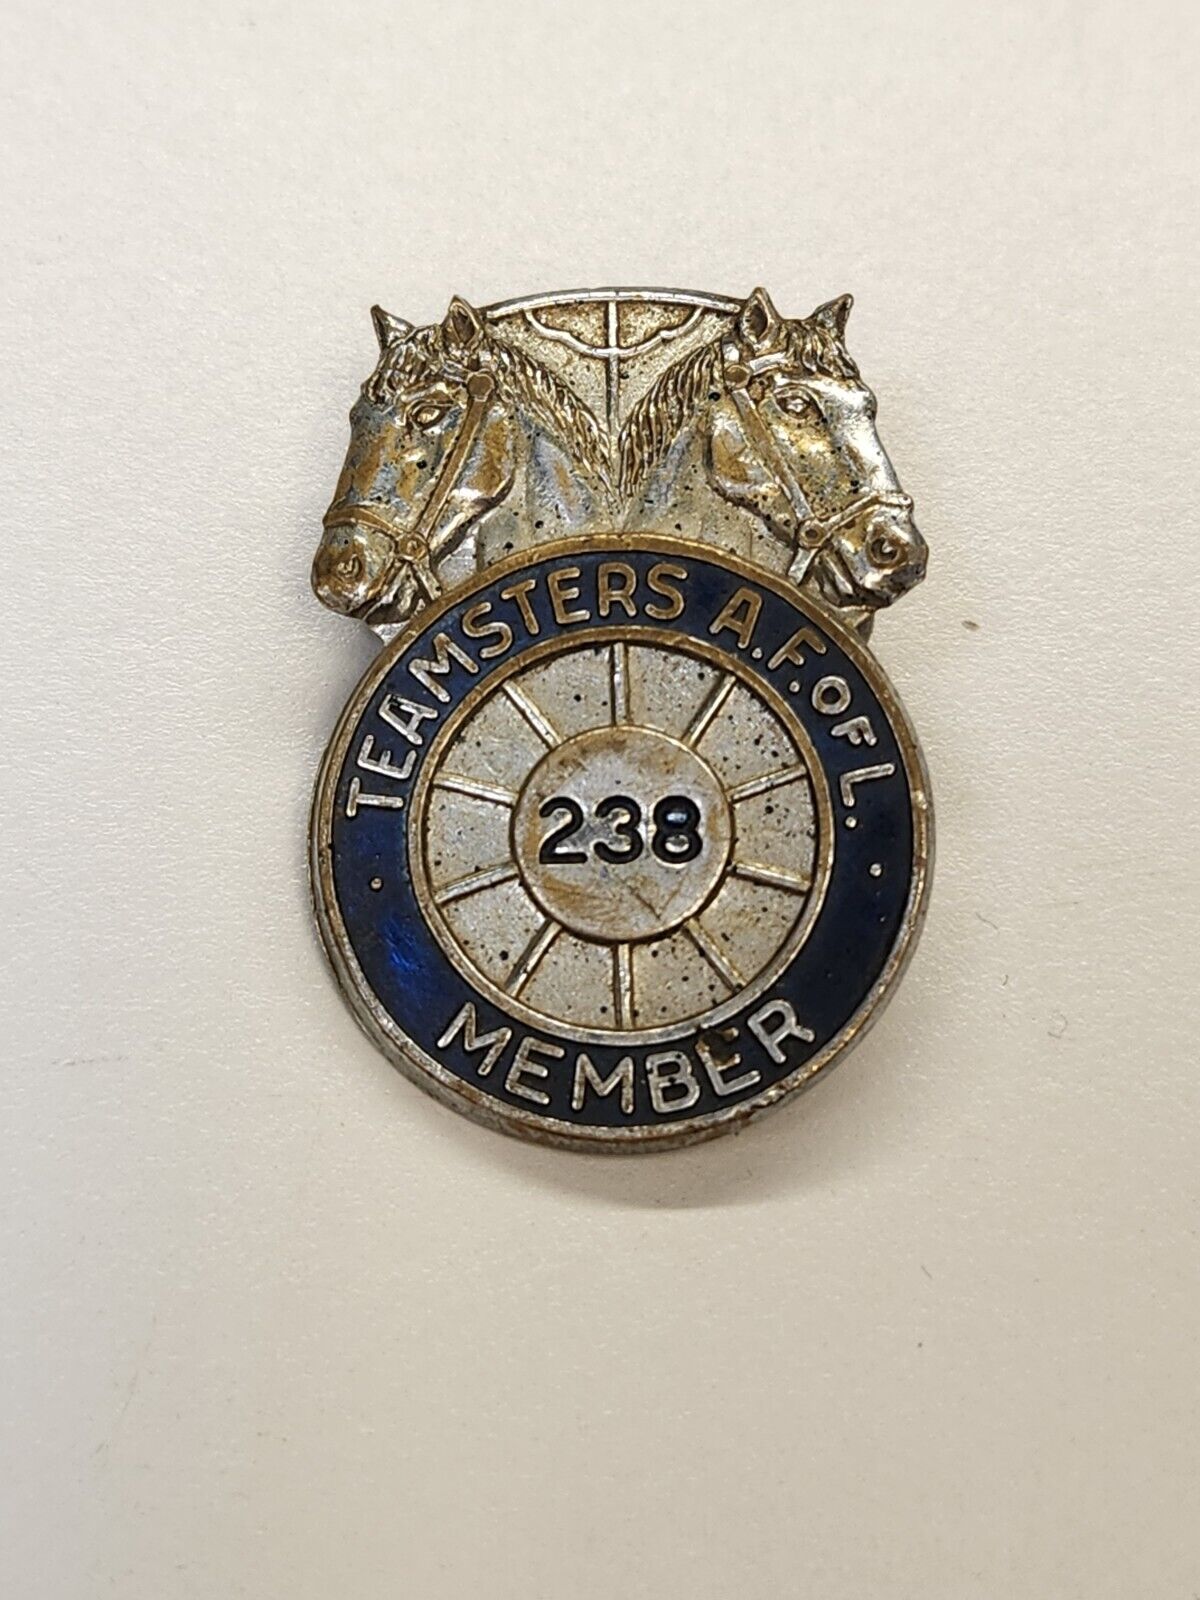 Vintage Teamsters Labor Union A.F. of L #238 Local Member Pin Badge C1950's